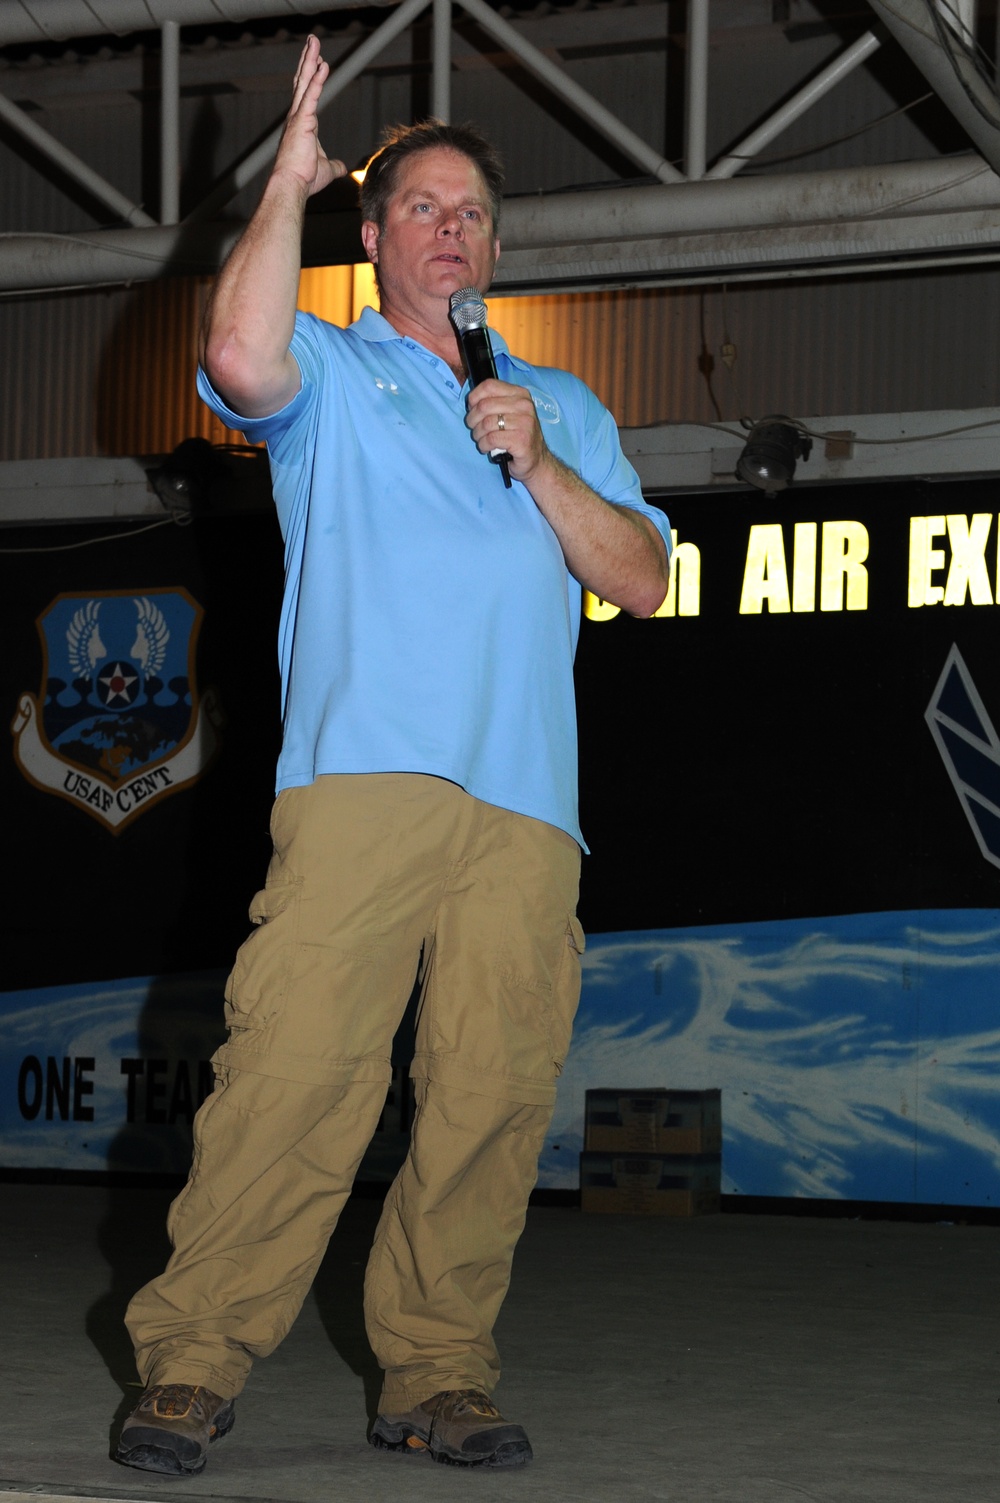 Comic on Duty entertain 380th Air Expeditionary Wing.